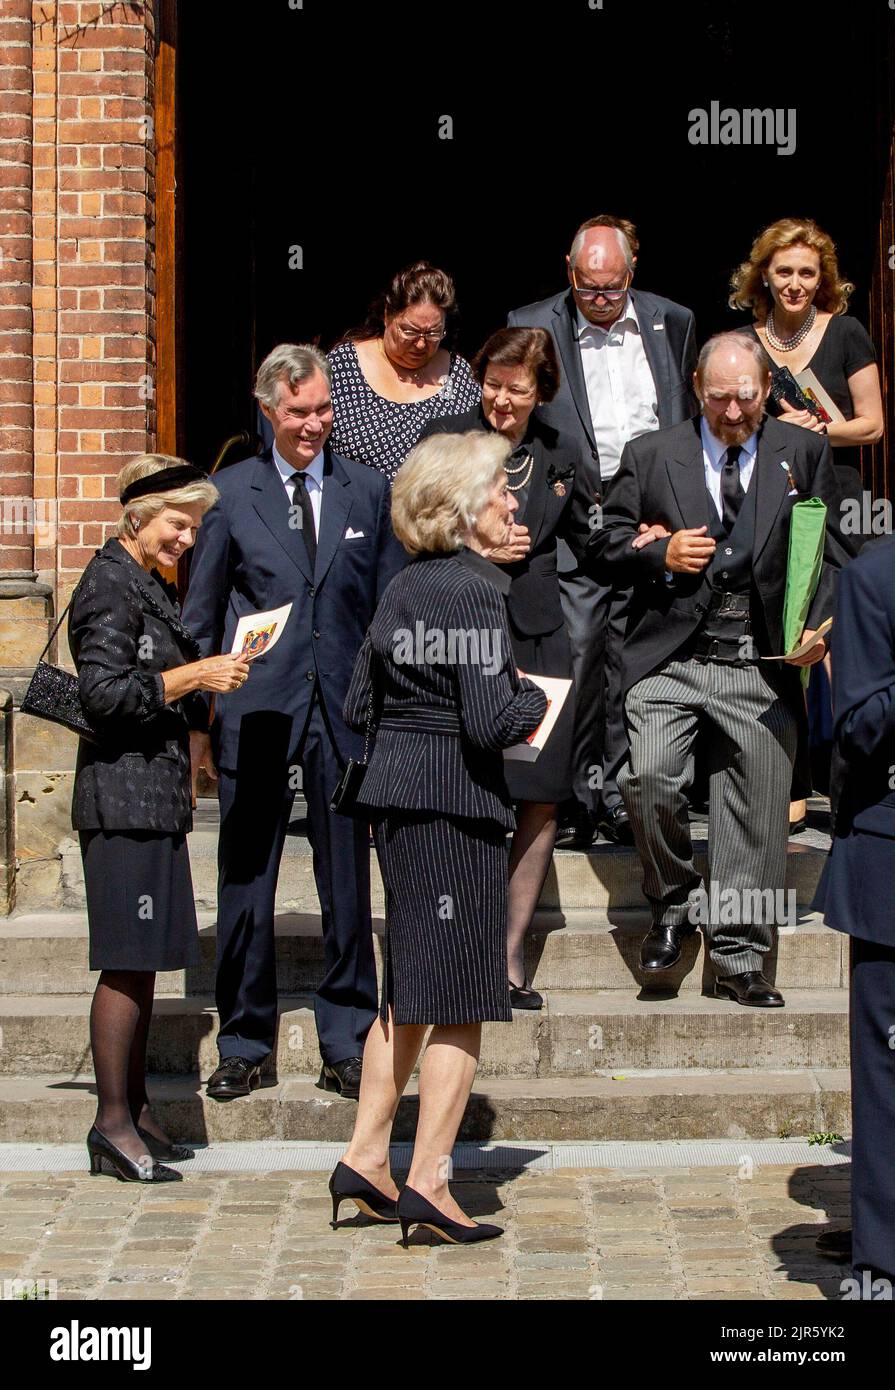 Archduchess Marie Astrid of Austria and Prince Guillaume of Luxembourg, Archduke Rudolph of Austria and Baroness Marie Hélène de Villenfagne de Vogelsanck, Princess Sibilla of Luxembourg and Archduchess Anna-Gabriele of Austria leave at the l eglise Saint-Pierre in Belil, on August 22, 2022, after attended the funeral of Prince Wauthier de Ligne (10-07-1952/15-08-2022), he was the First Cousin of the Grand Duke of Luxembourg Photo: Albert Nieboer/Netherlands OUT/Point de Vue OUT Stock Photo